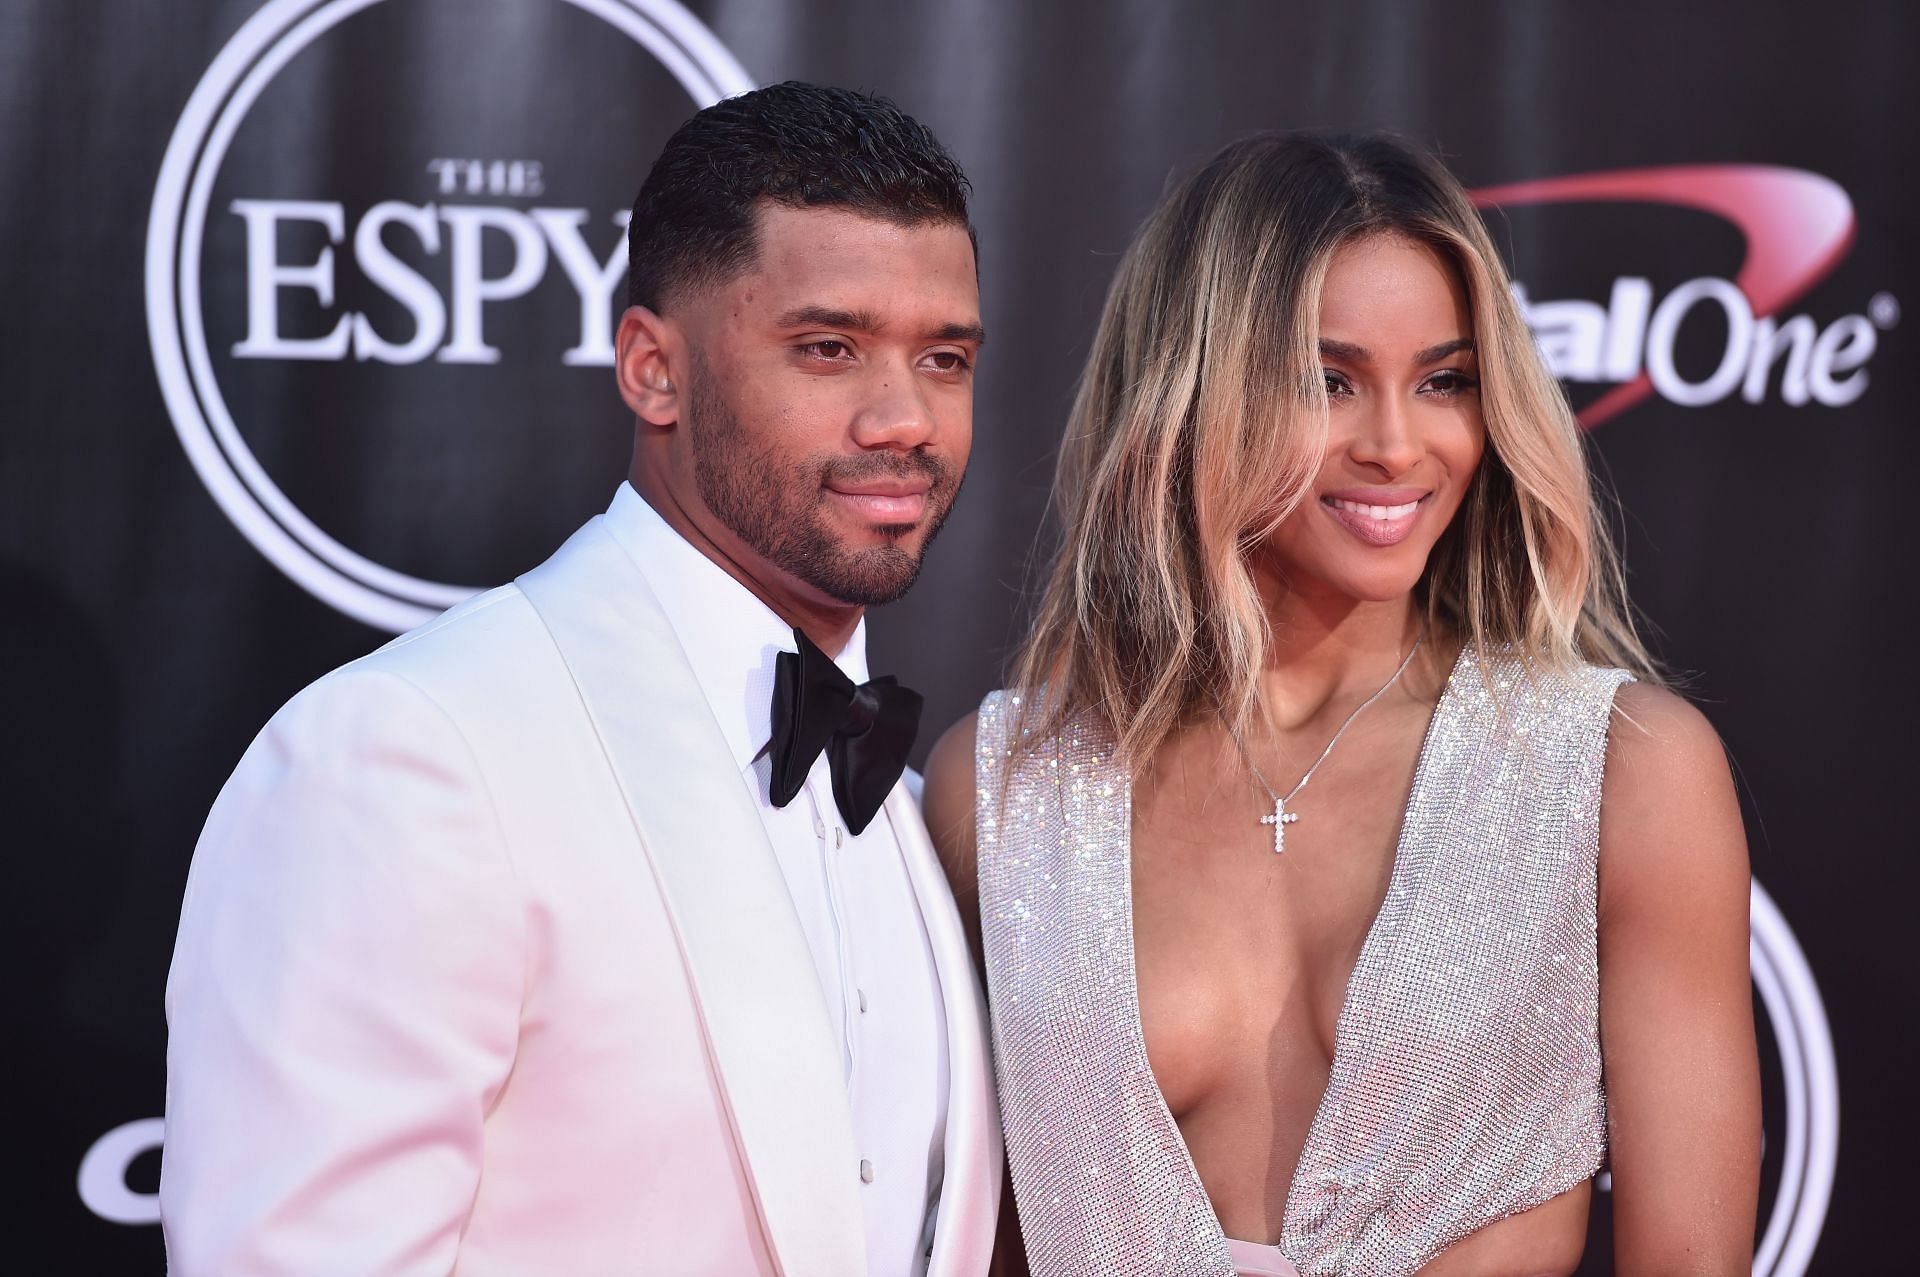 Russell Wilson and Ciara at the 2016 ESPYS